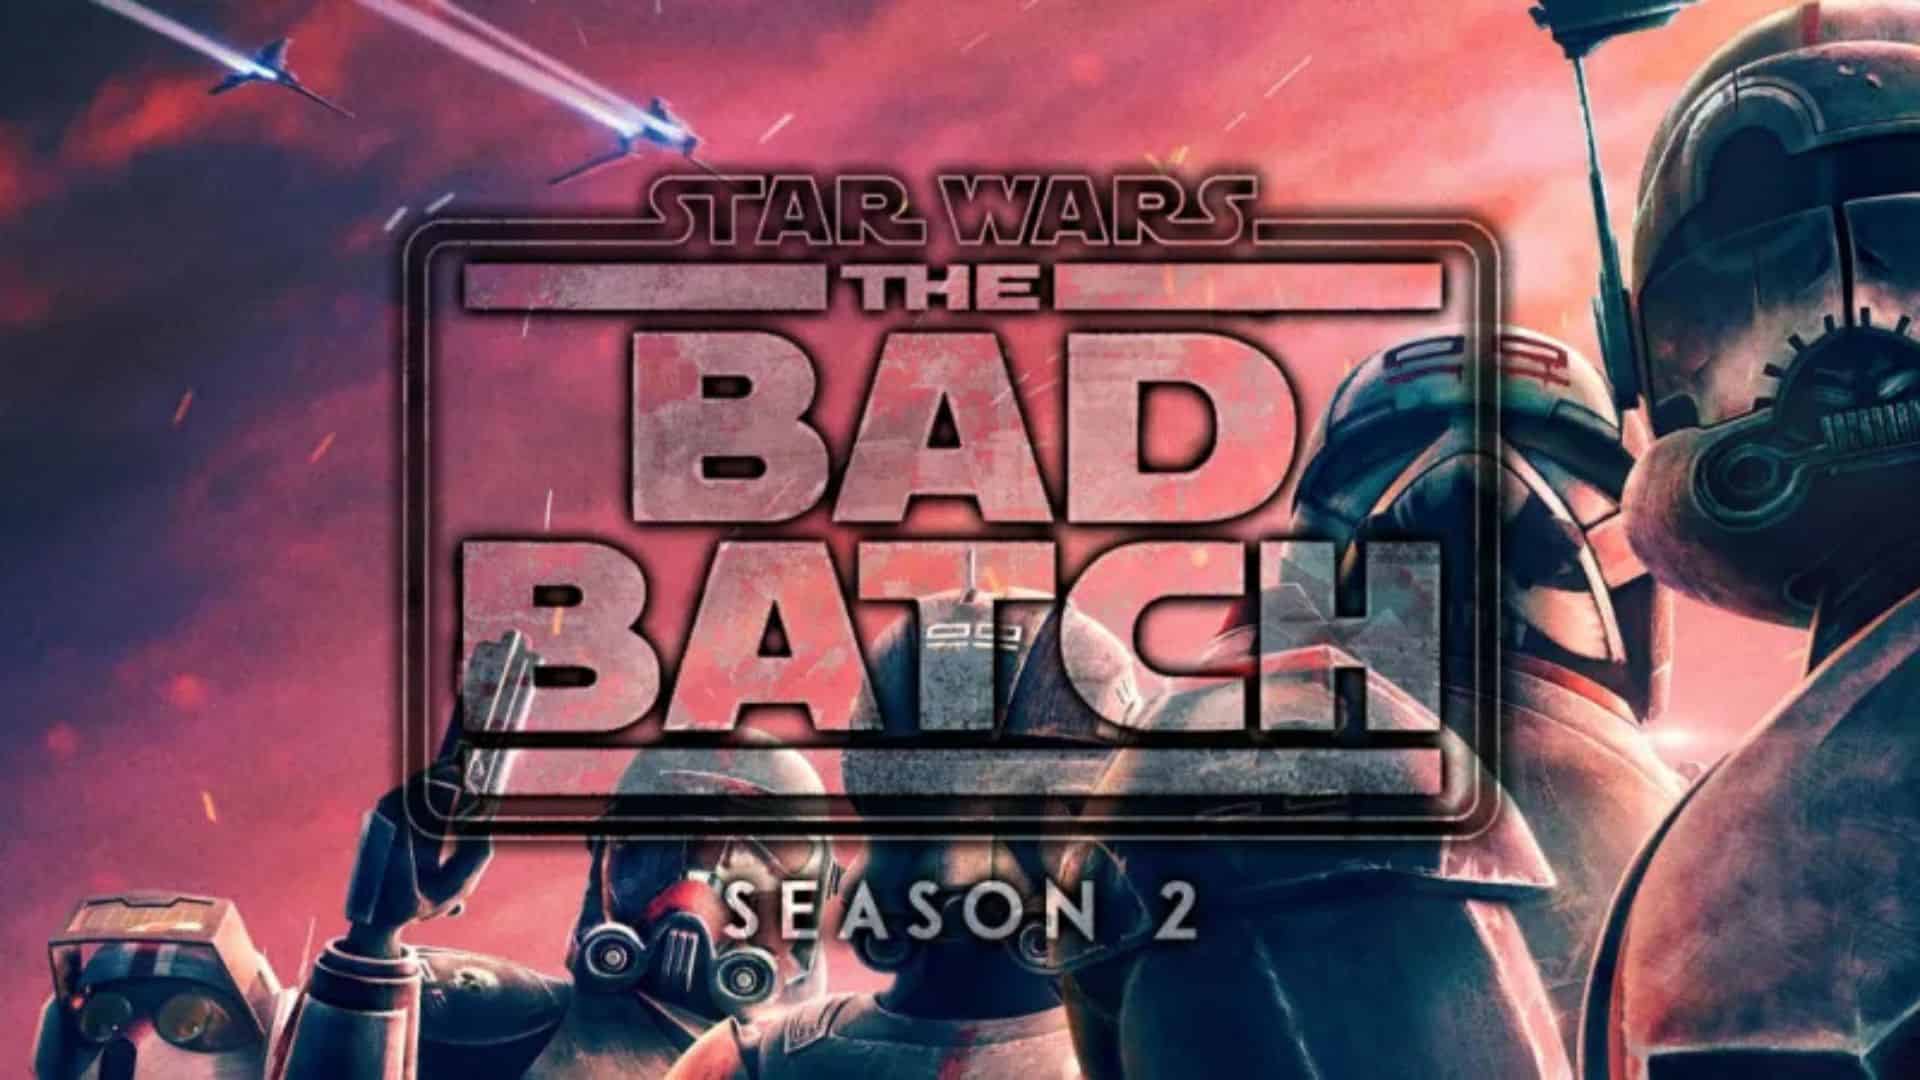 Star Wars The Bad Batch Season 2 Episodes 1 And 2 Release Date Sp